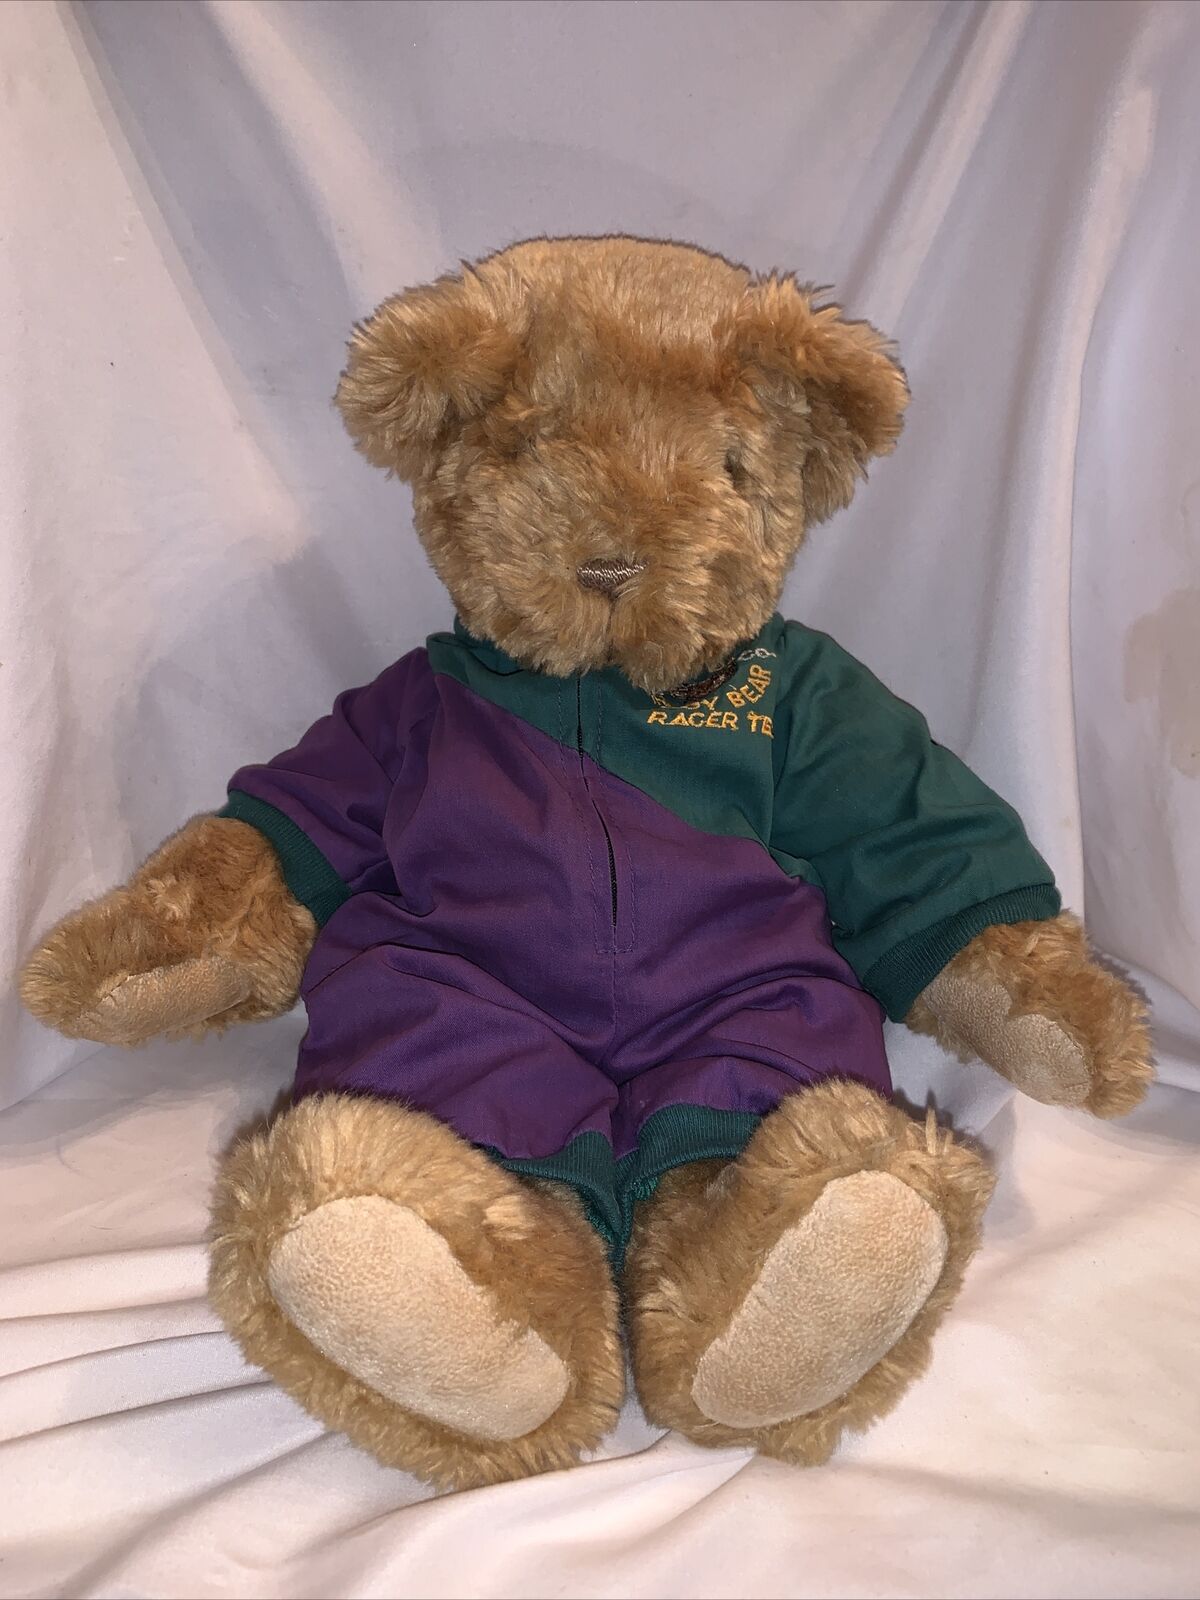 Vermont Teddy Bear Racer Ted 15" Tall Brown Jointed Vtg 90s Racecar Driver